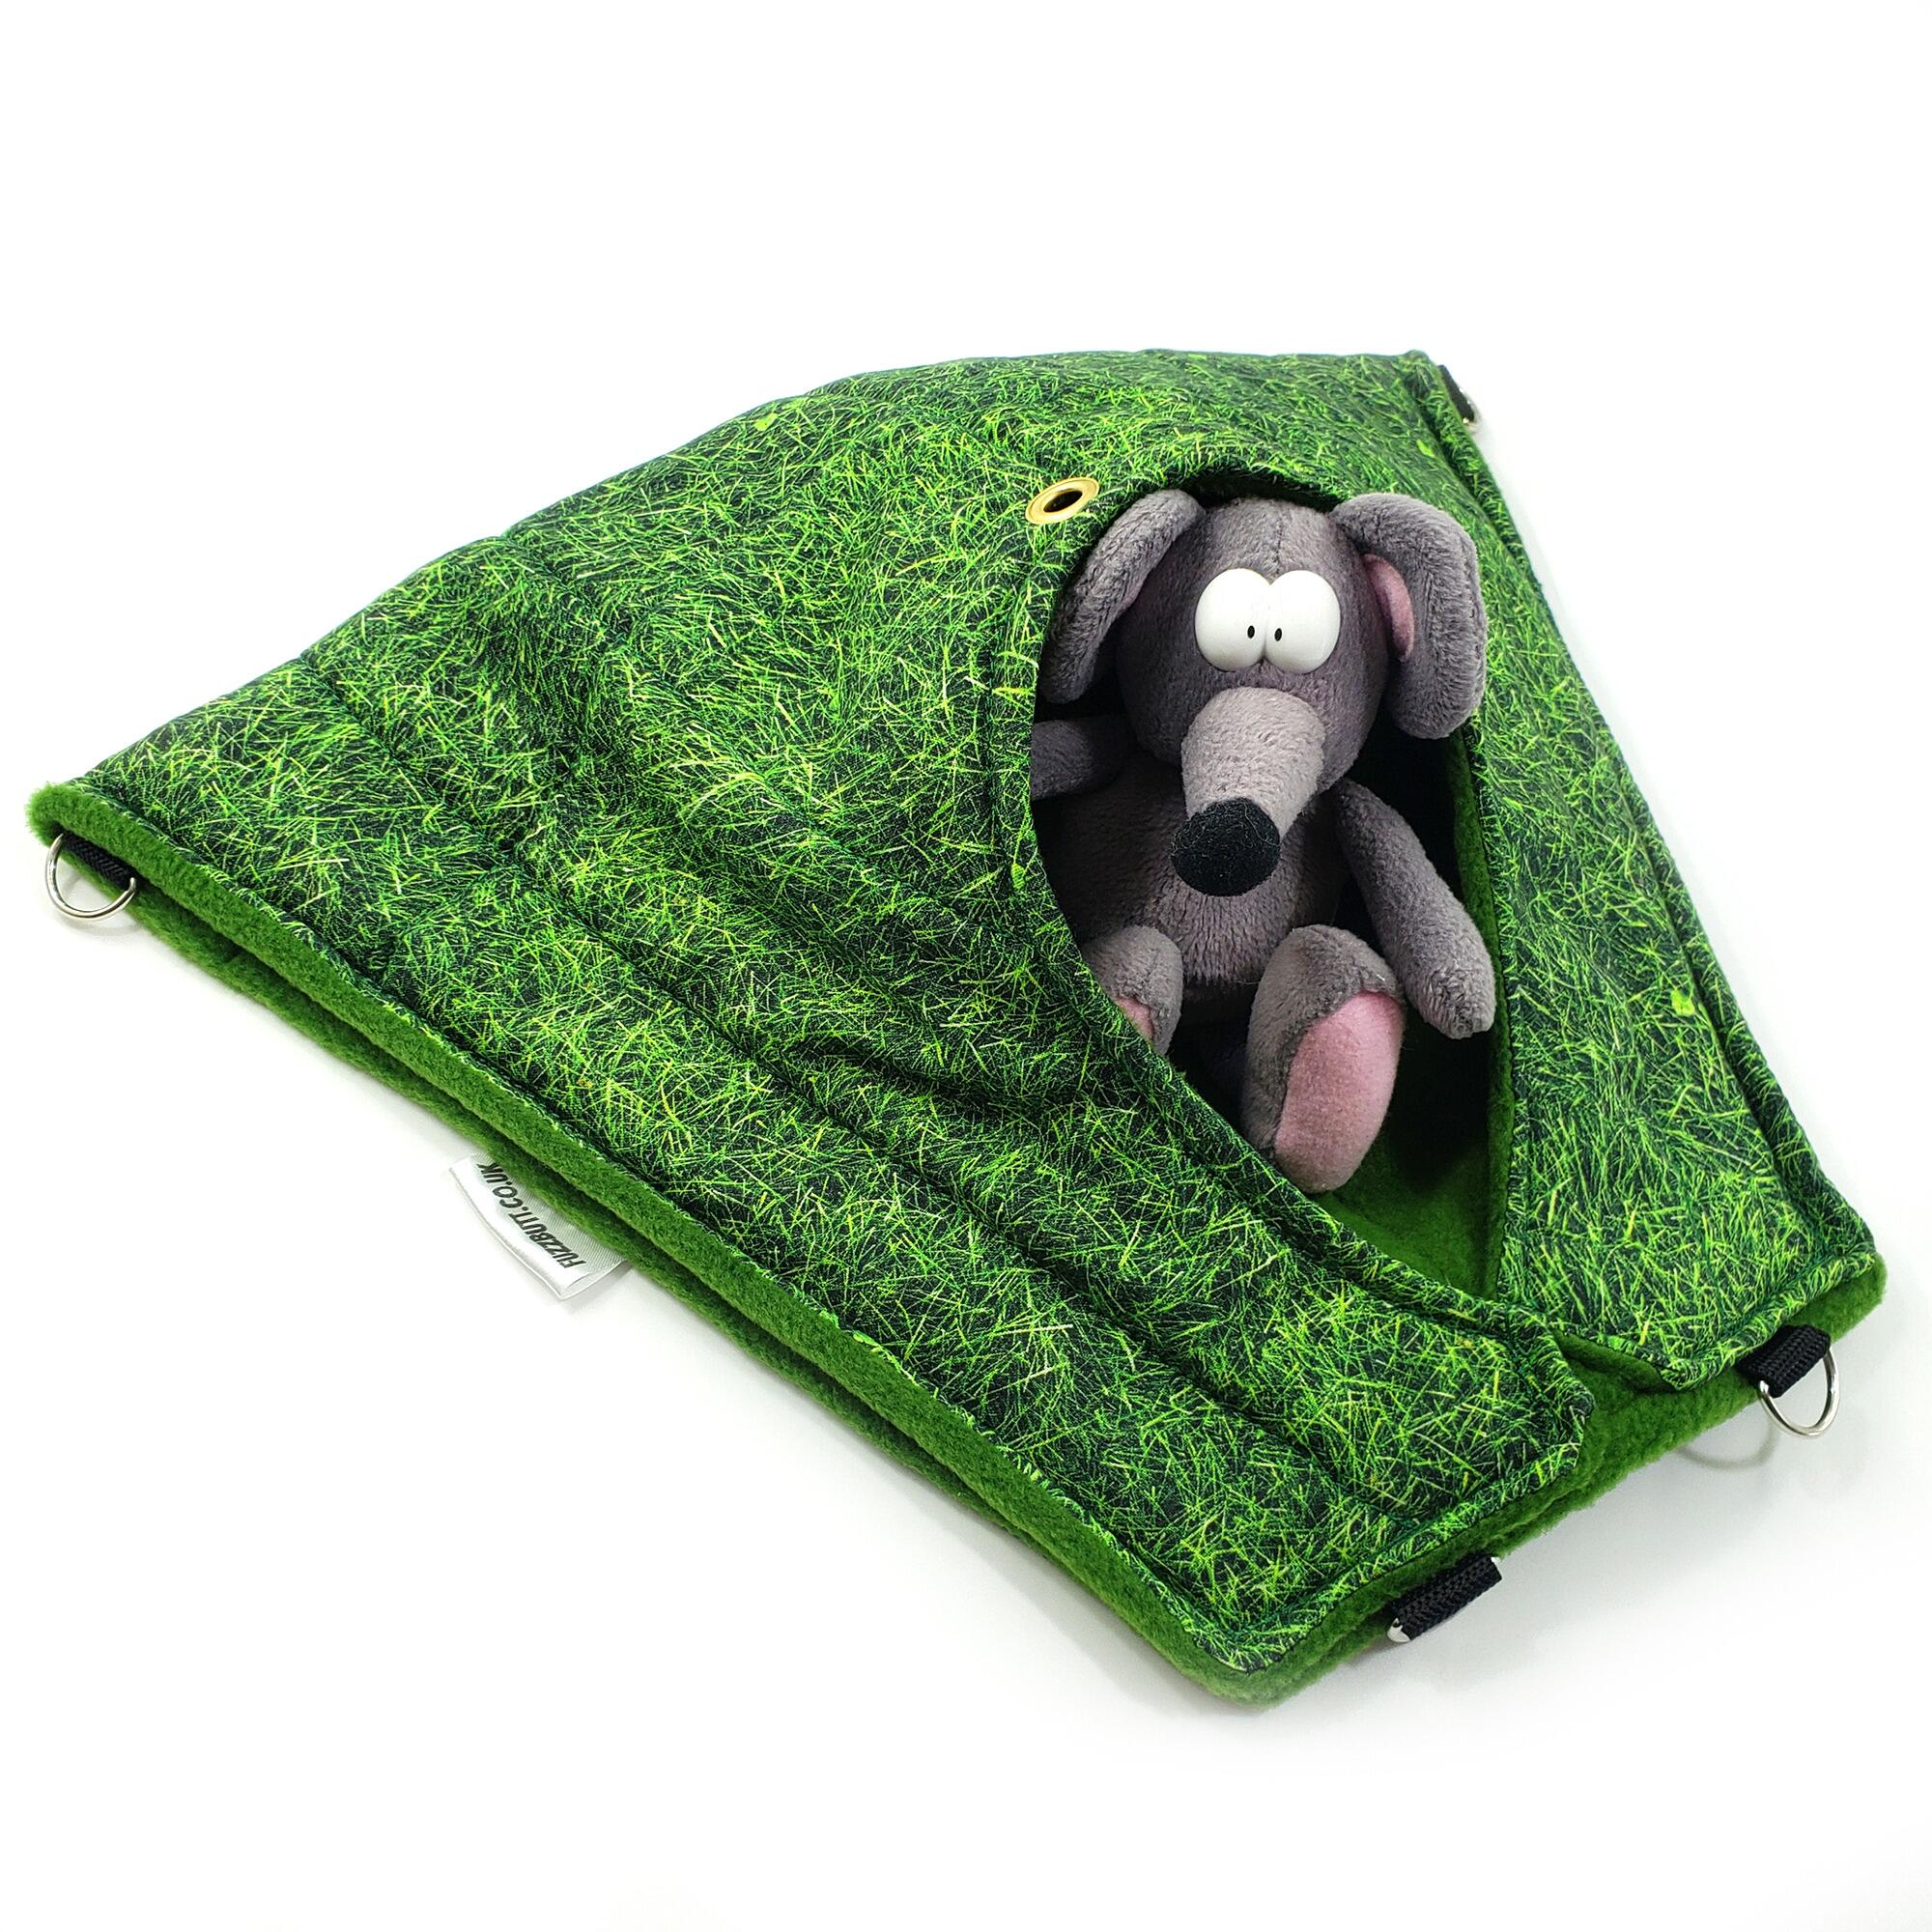 The Fuzzbutt Pouch Pod - multiway hanging rat hammock pod for your small furry!